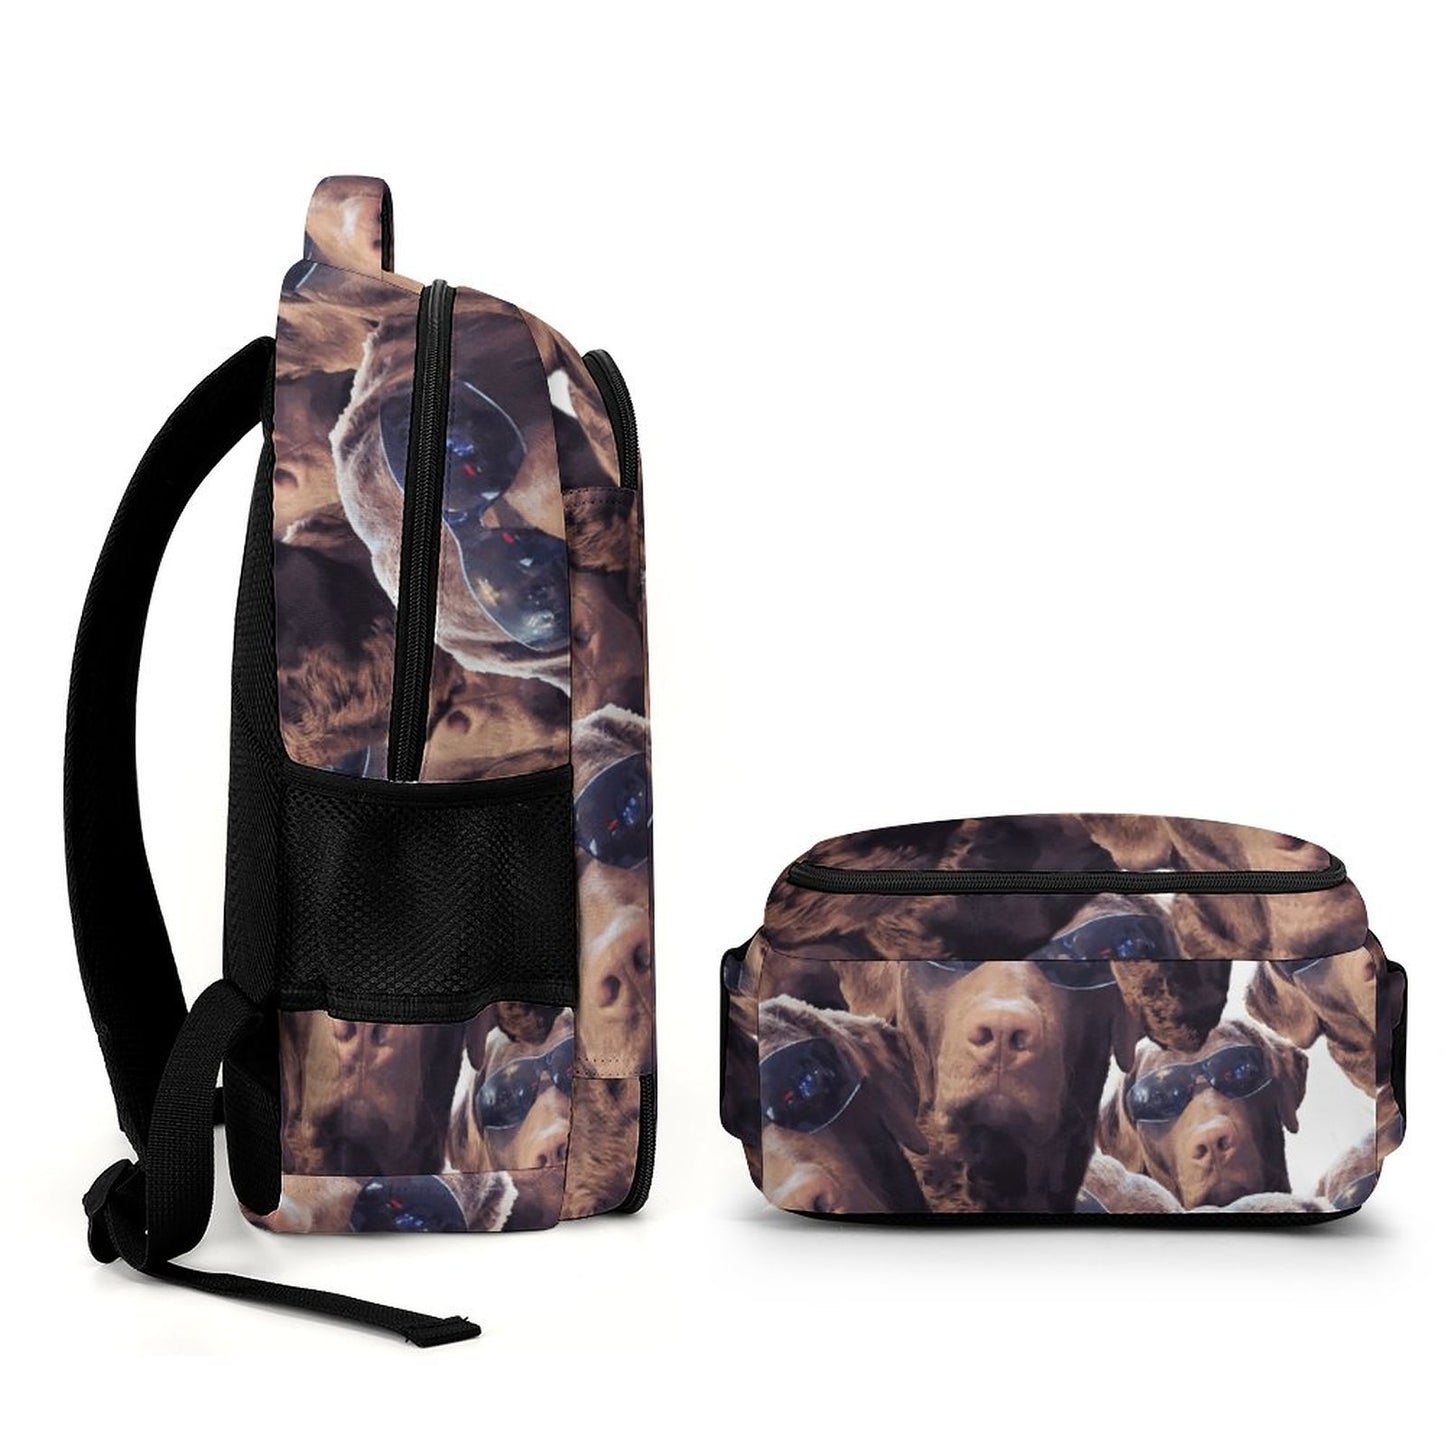 FOXY LADY _ LAB _ COLLAGE FACE DESIGN - Multi-Pocket Travel Bags